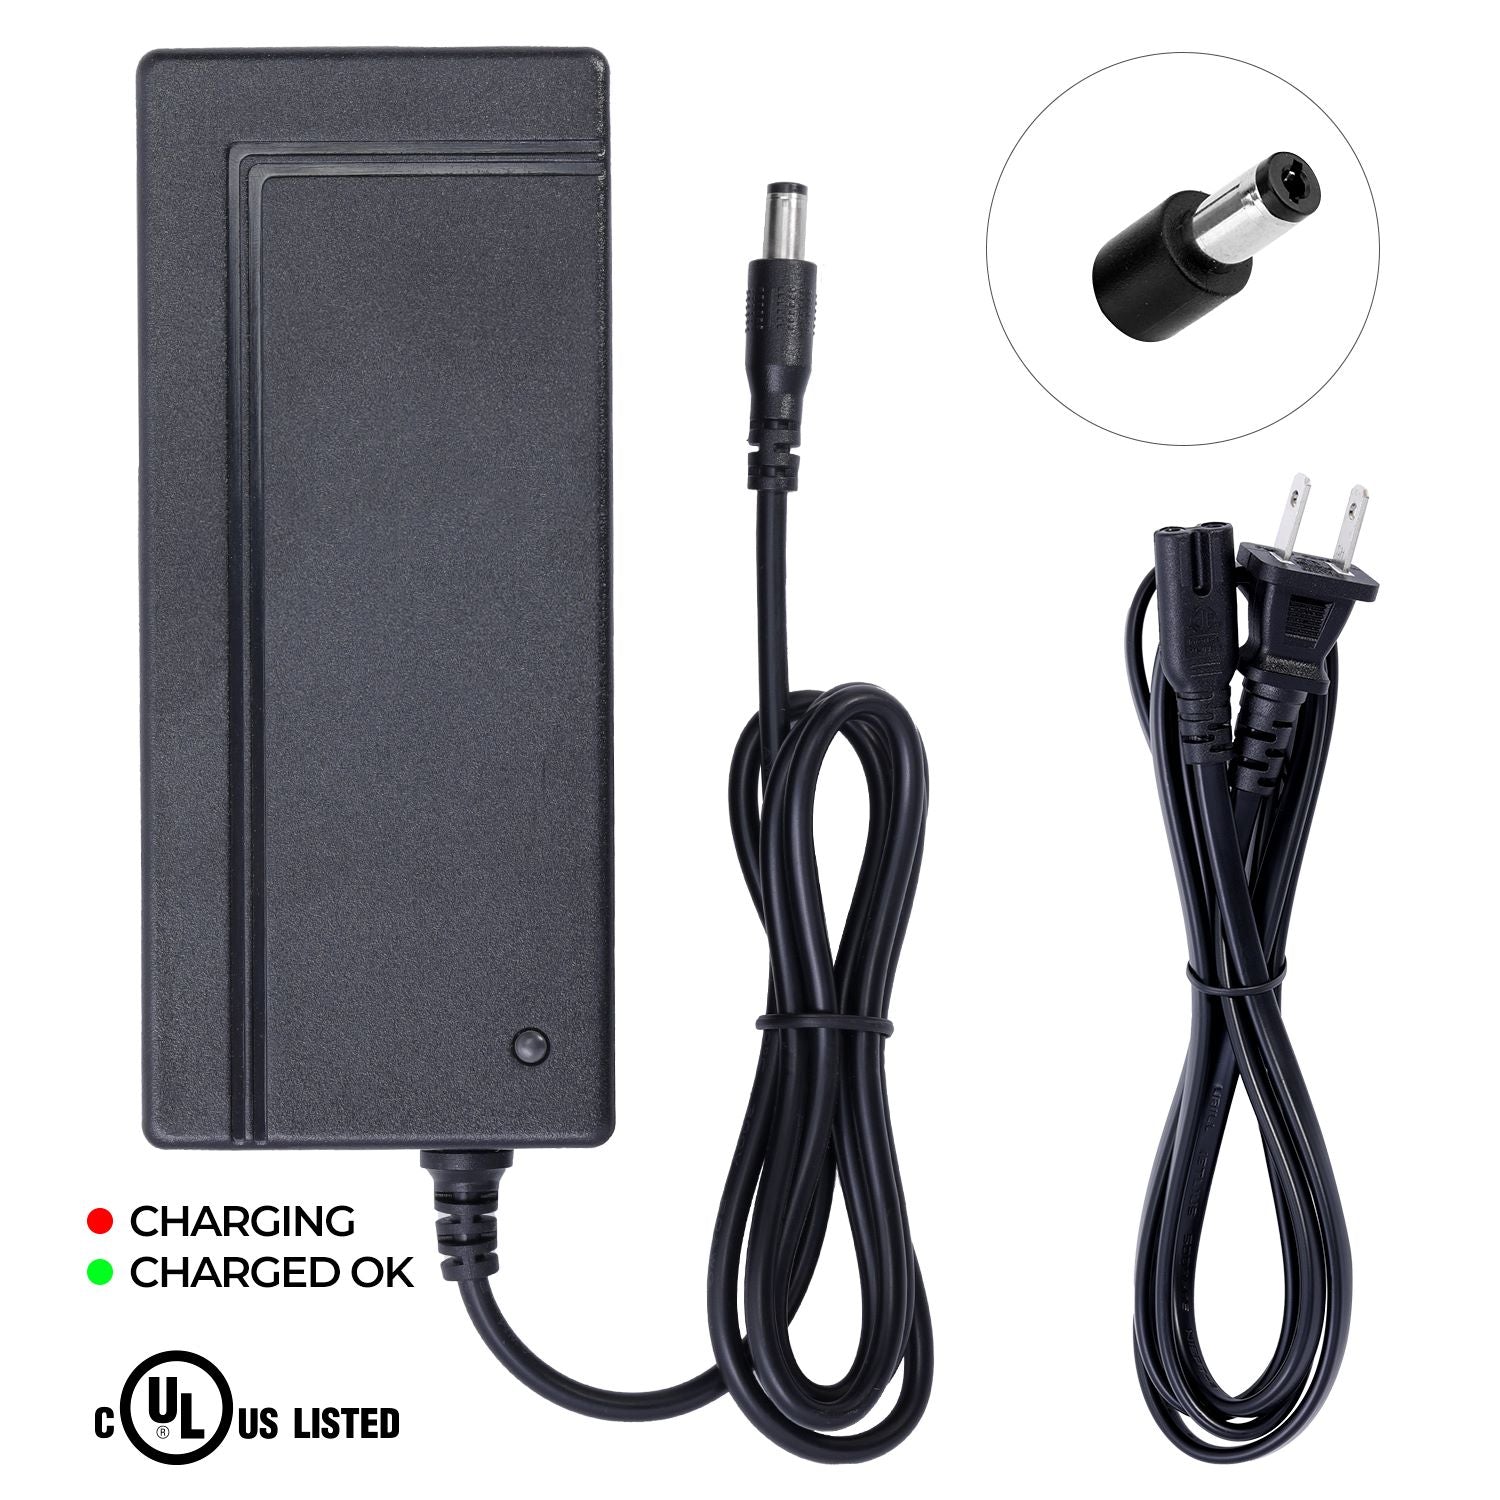 UL Listed Charger for Swagtron EB5 Pro eBike